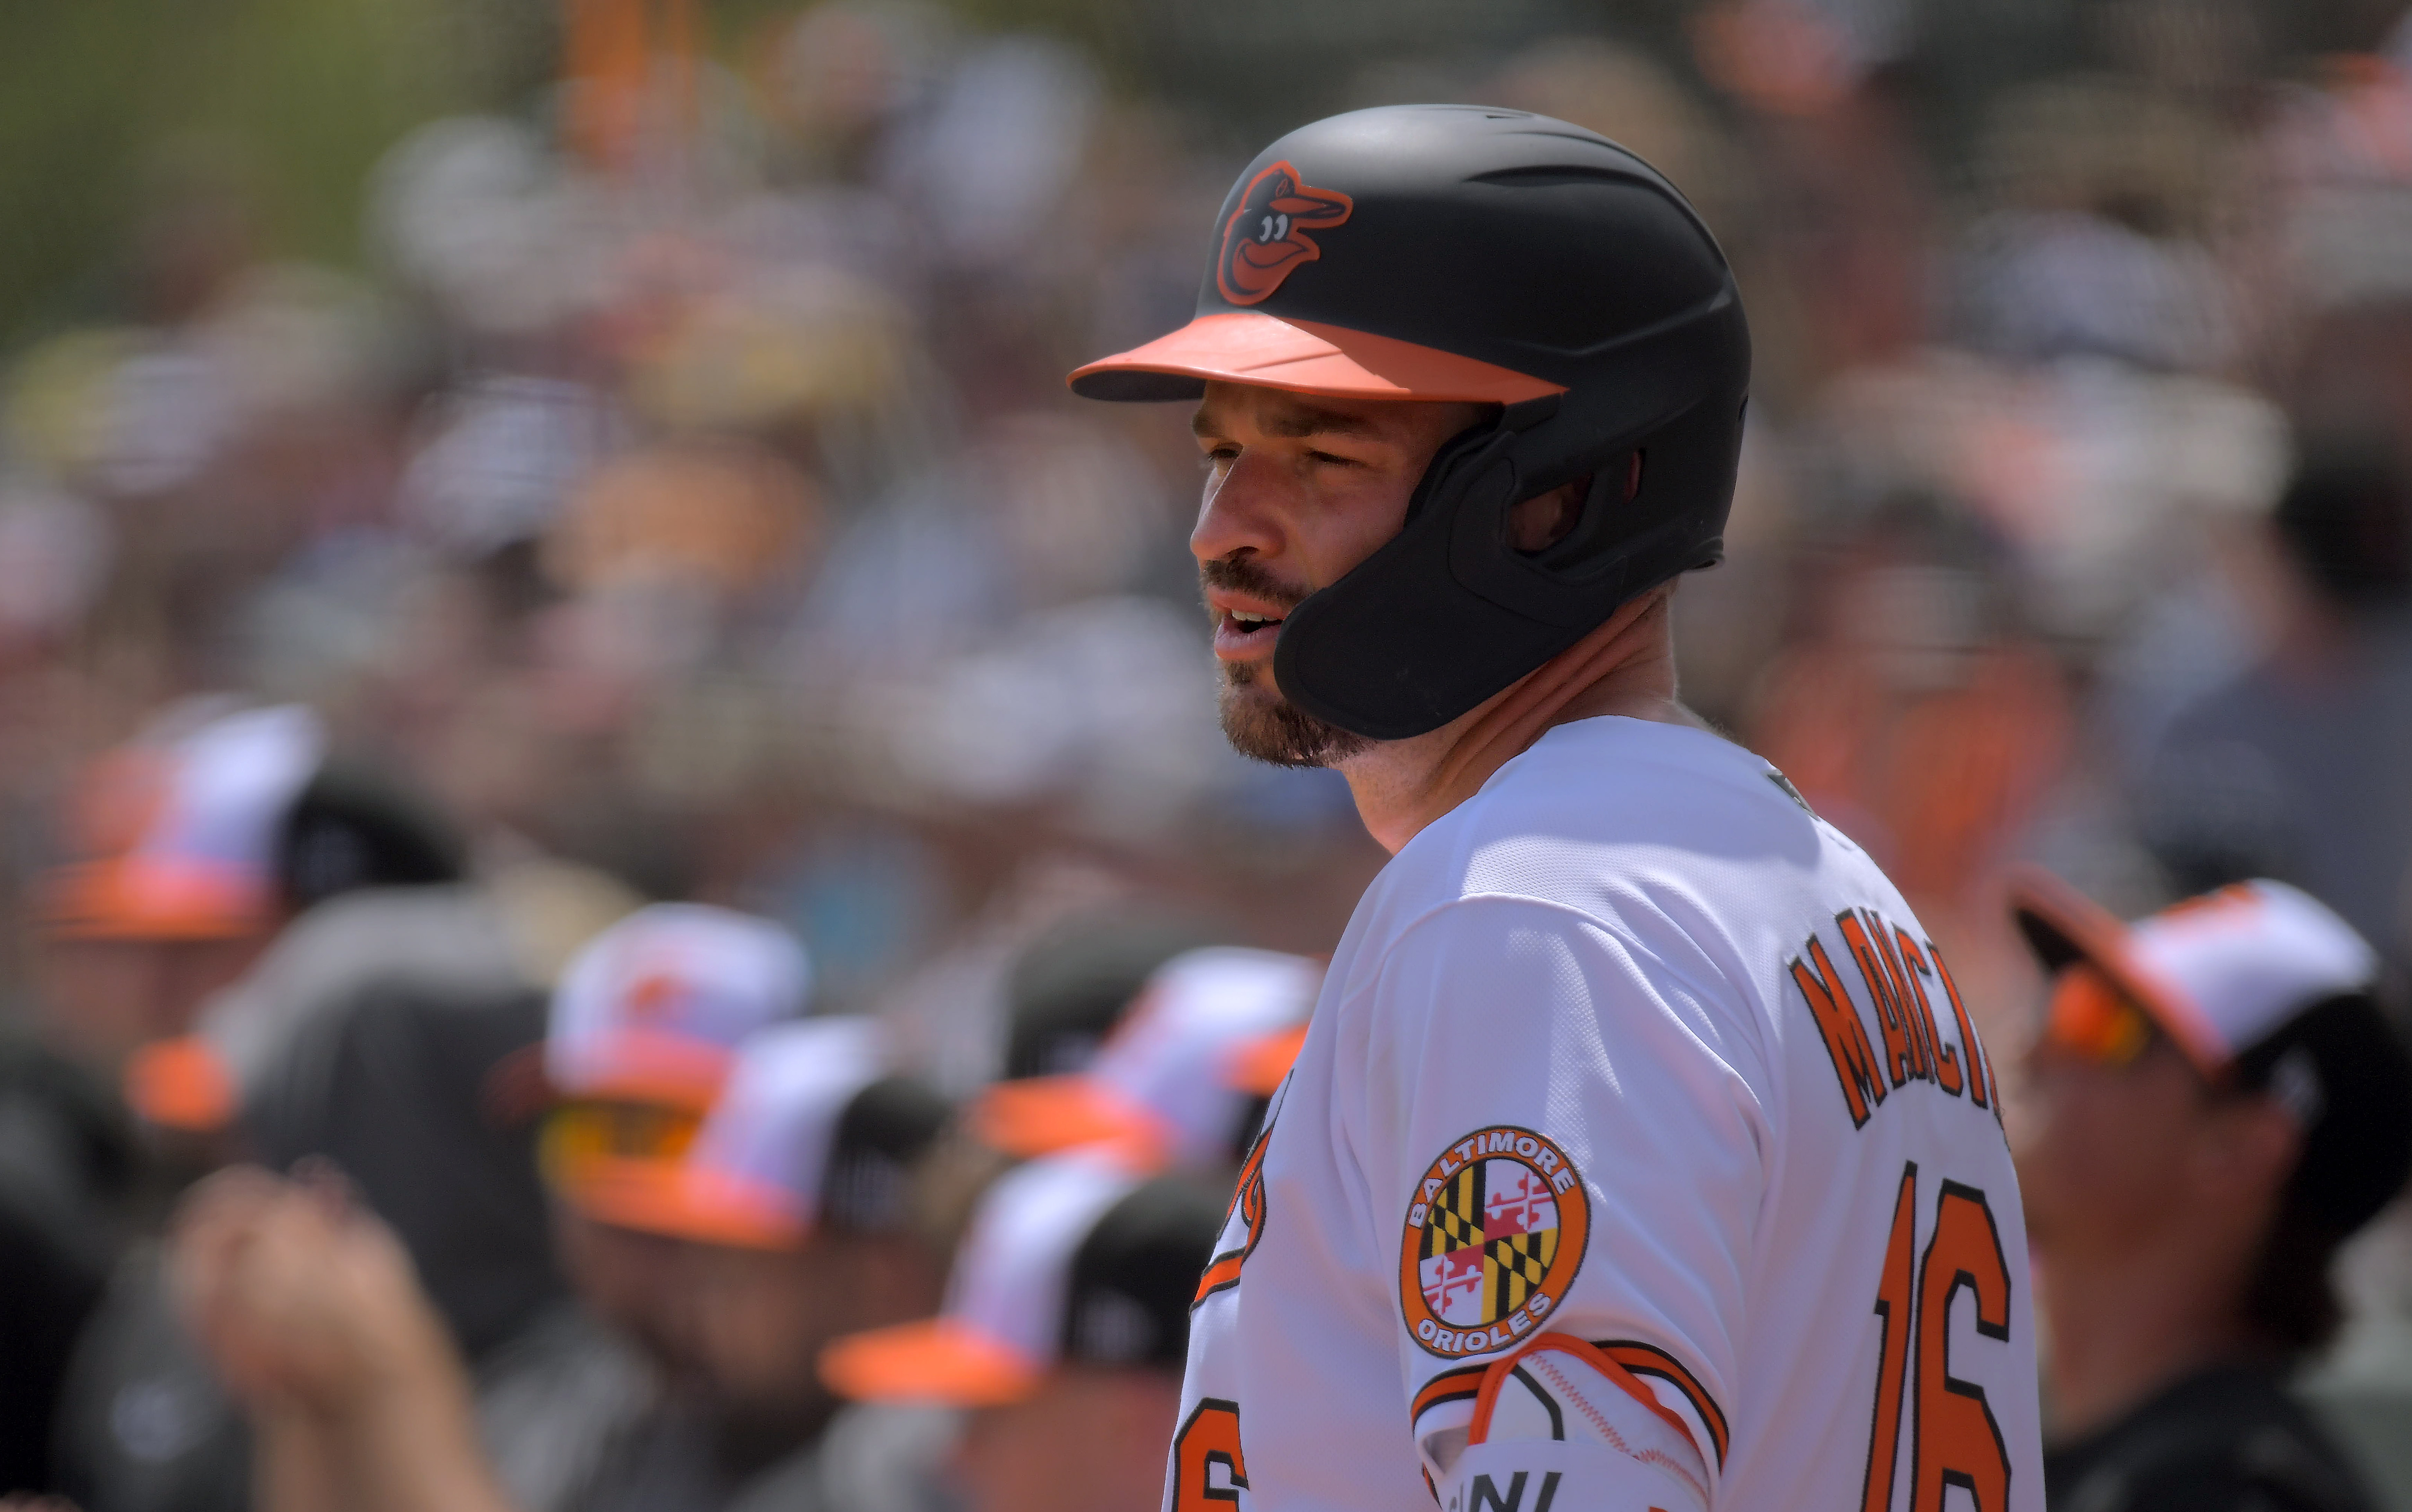 Trey Mancini doesn't think new deal changes his situation; Adley